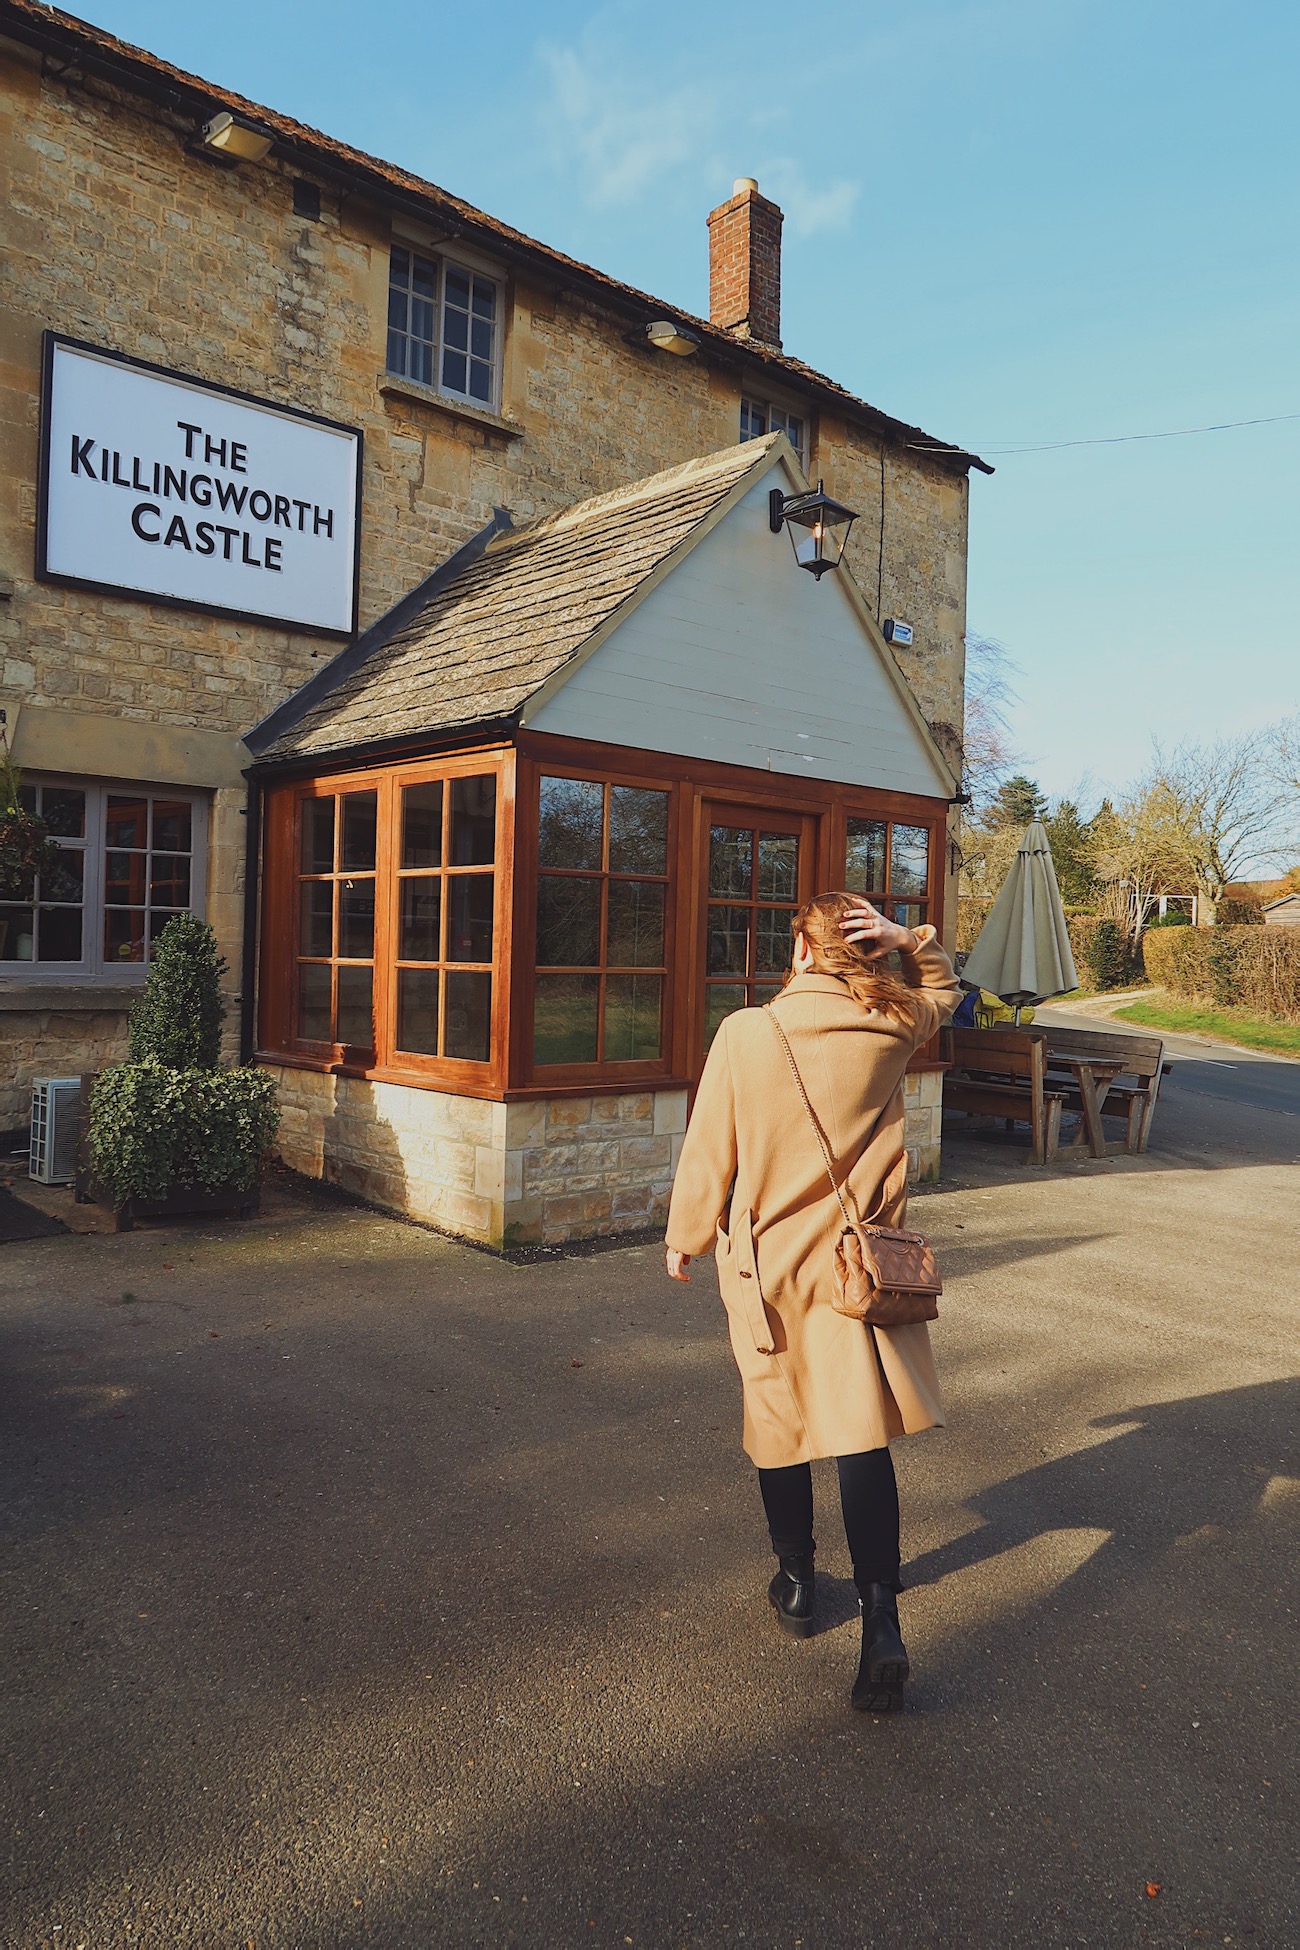 country pubs in the uk